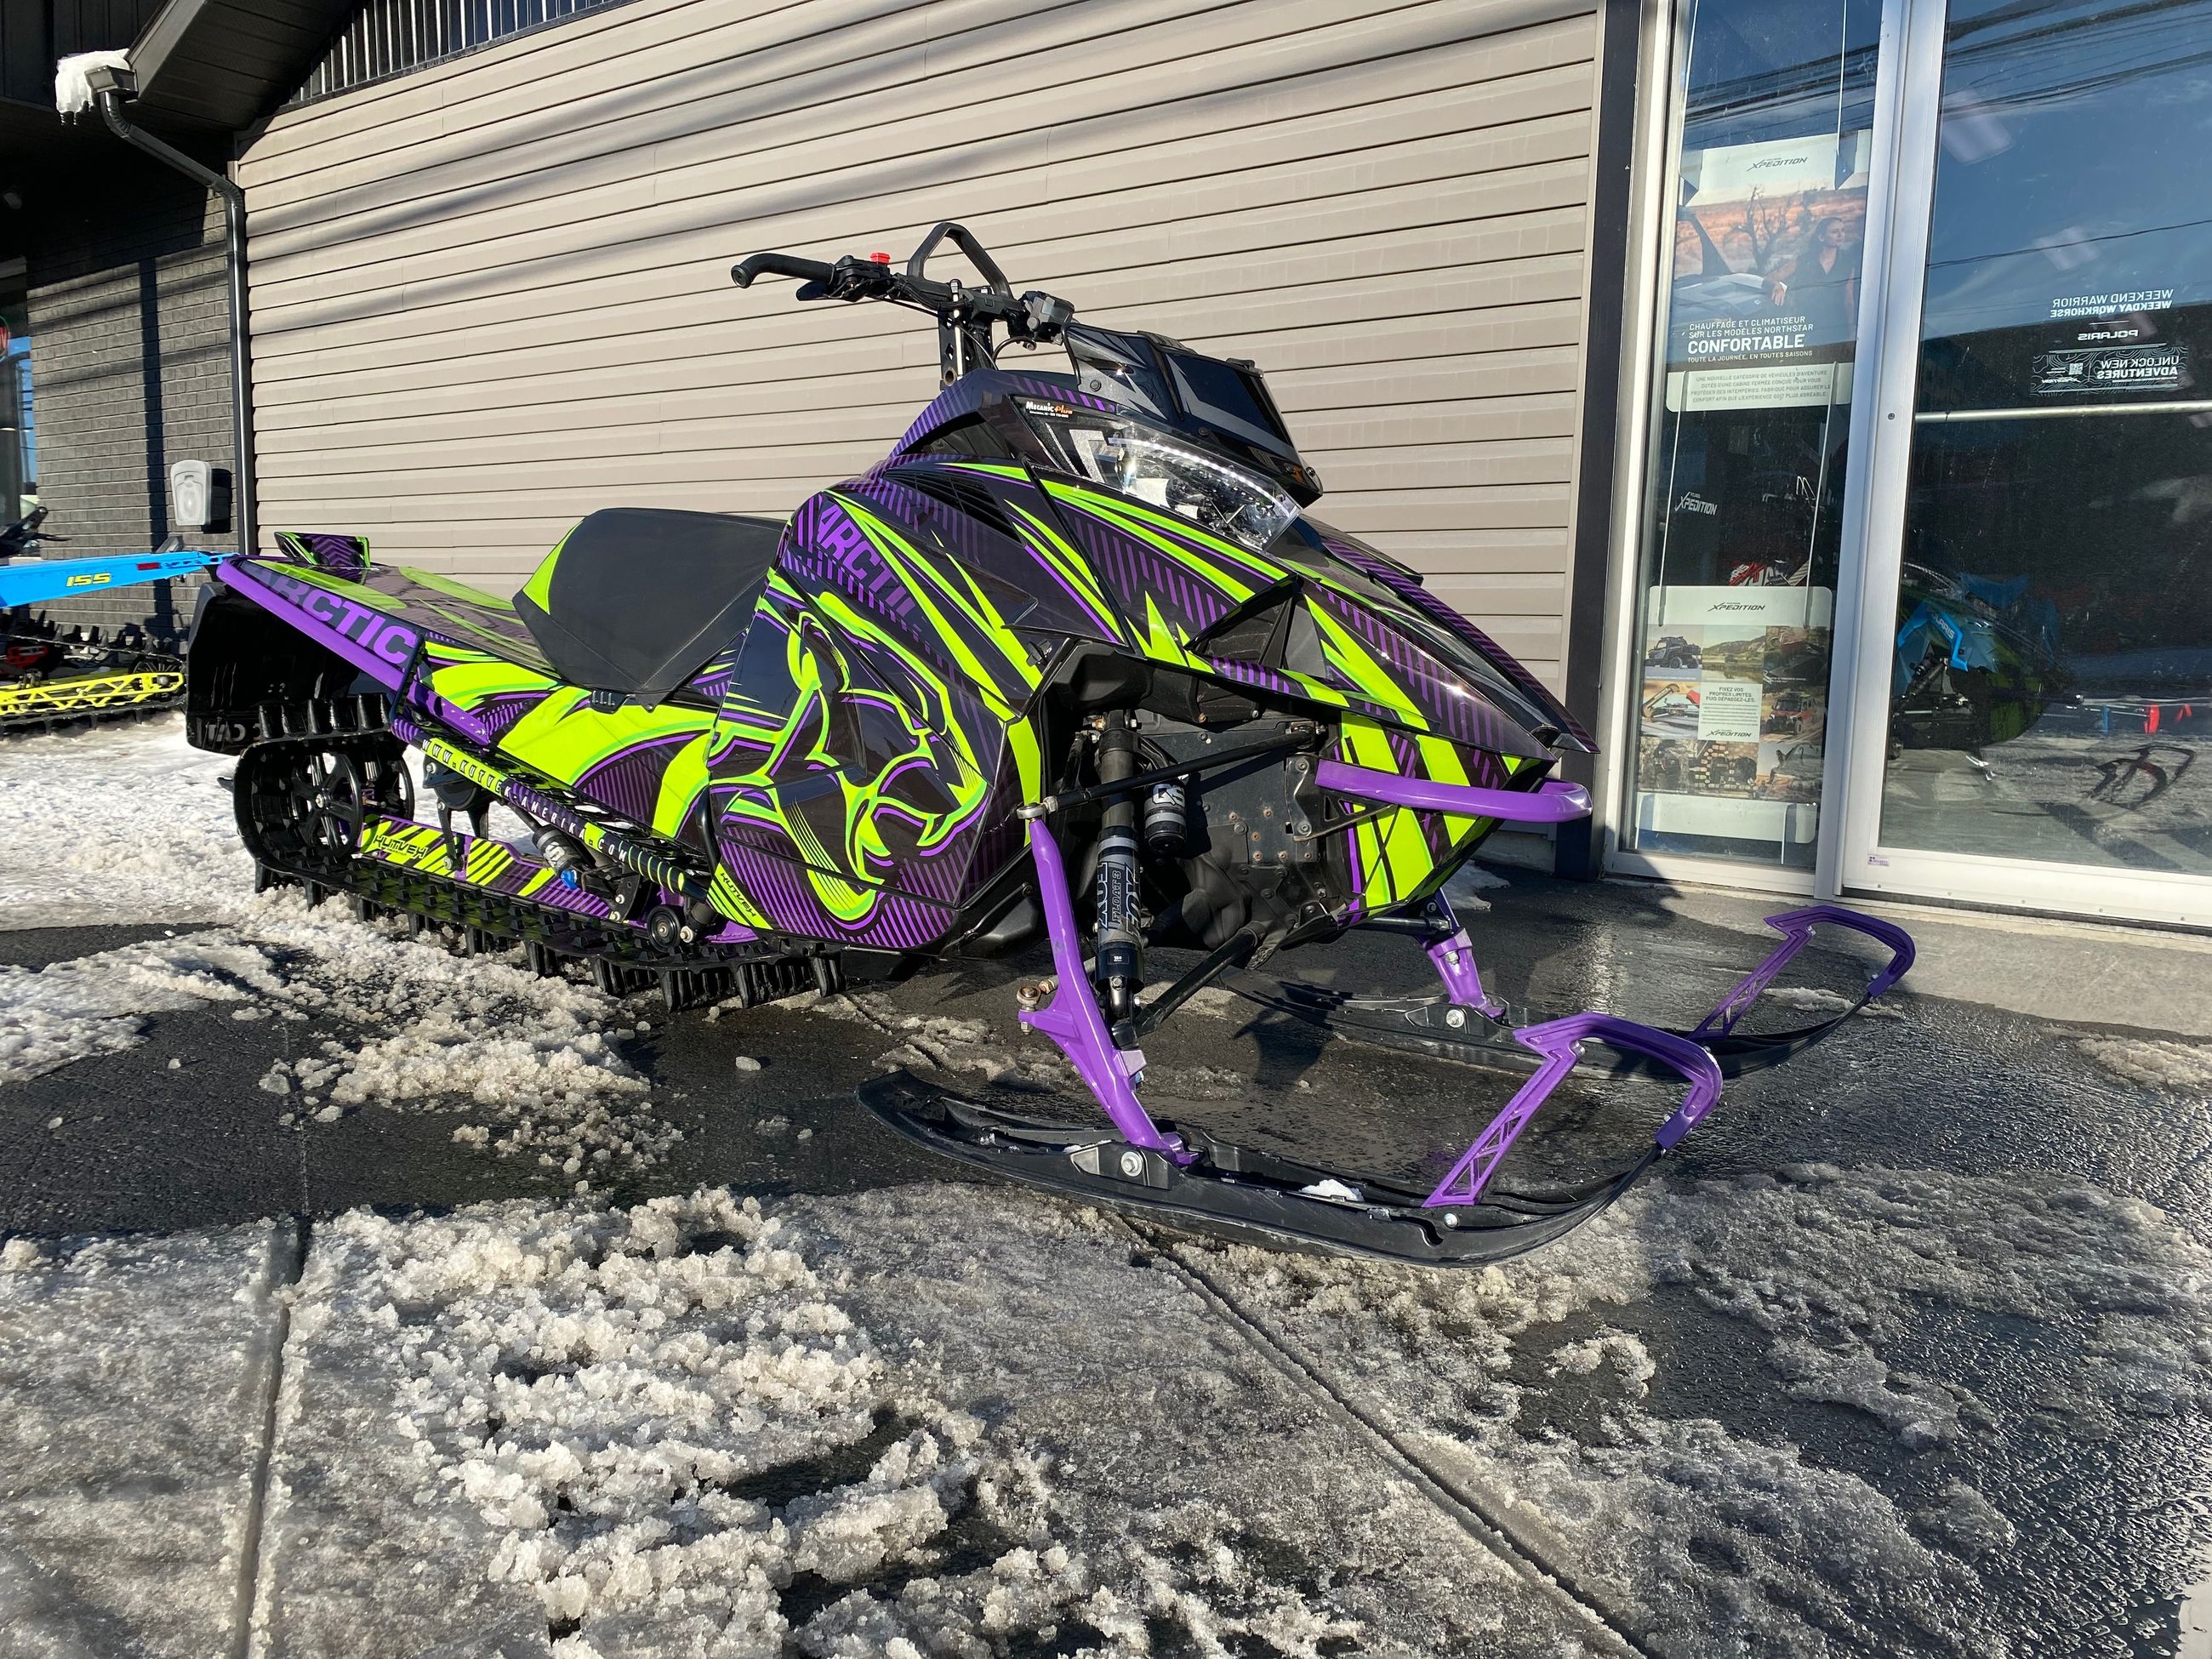 2019 Arctic Cat MOUNTAIN CAT M8 ALPHA ONE 154 3'' DEMO 842 KM 46 HOURS ONLY!!!